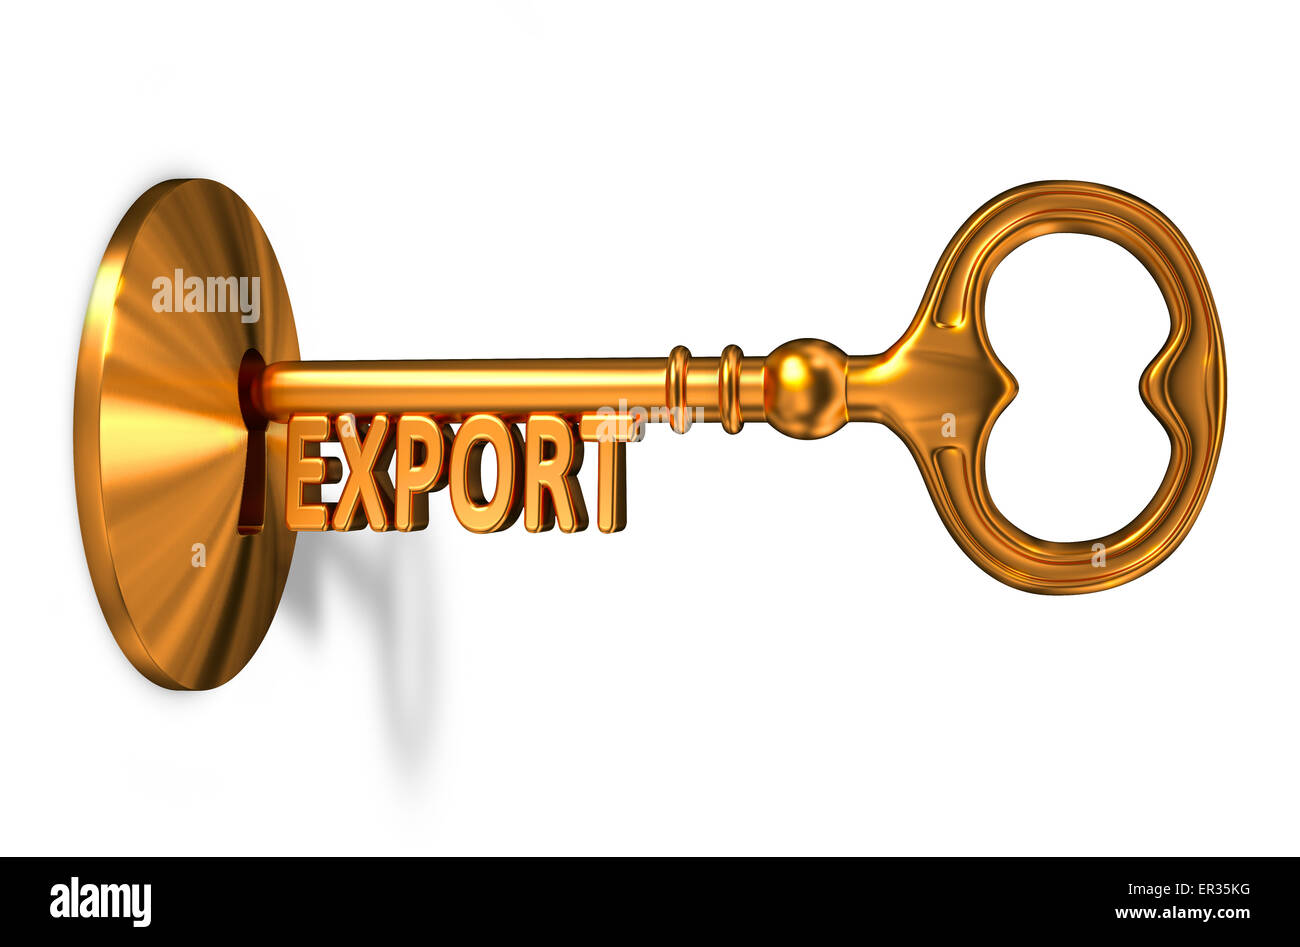 Export - Golden Key is Inserted into the Keyhole. Stock Photo